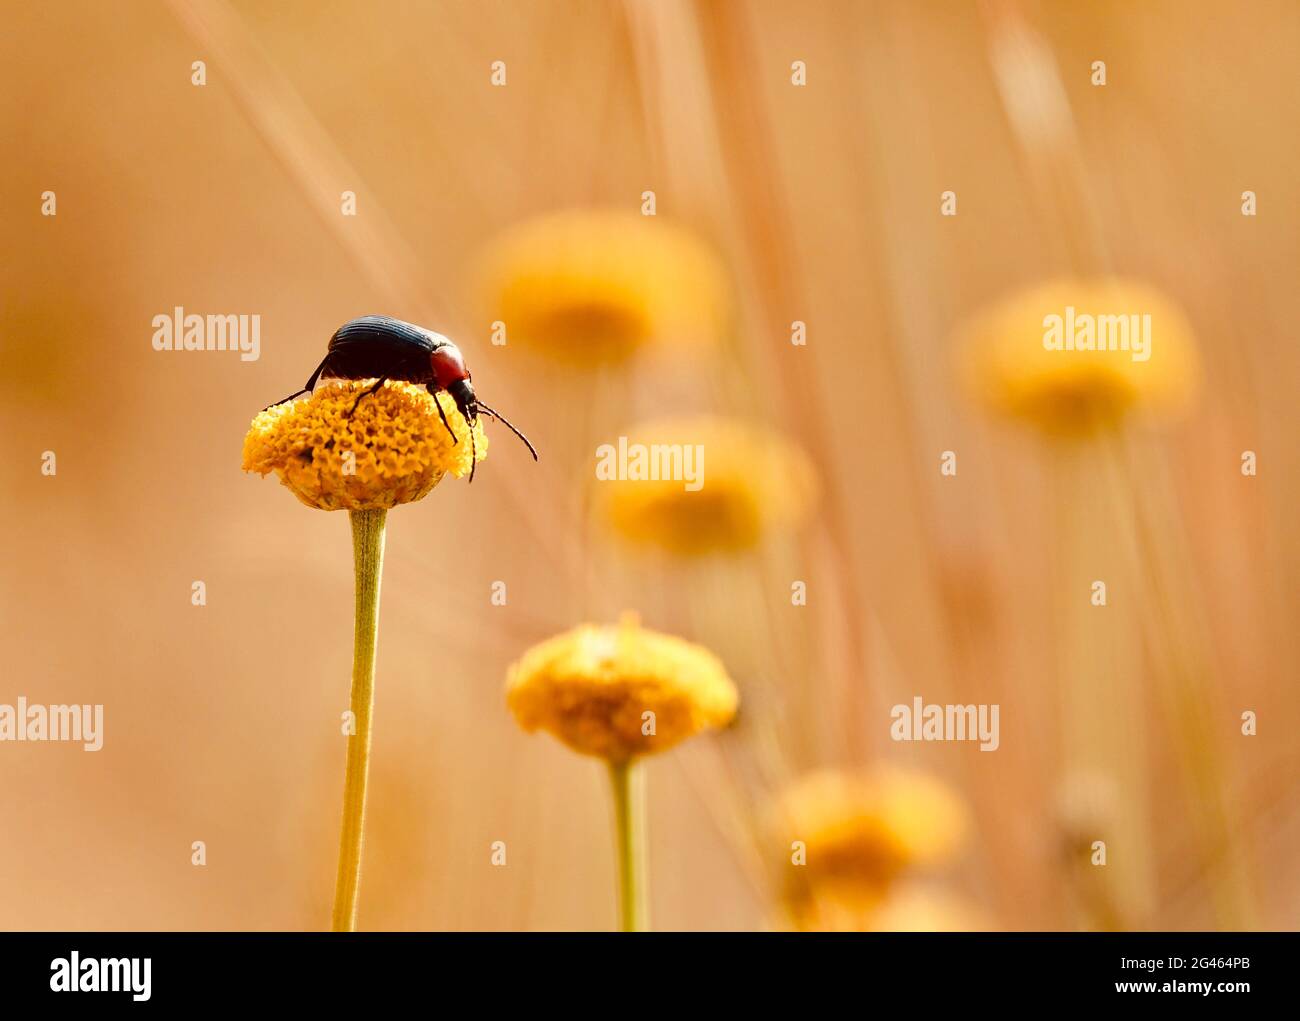 Black beetle with red thorax and long antennae on a yellow santolina flower in the warm light of sunset in summer Stock Photo